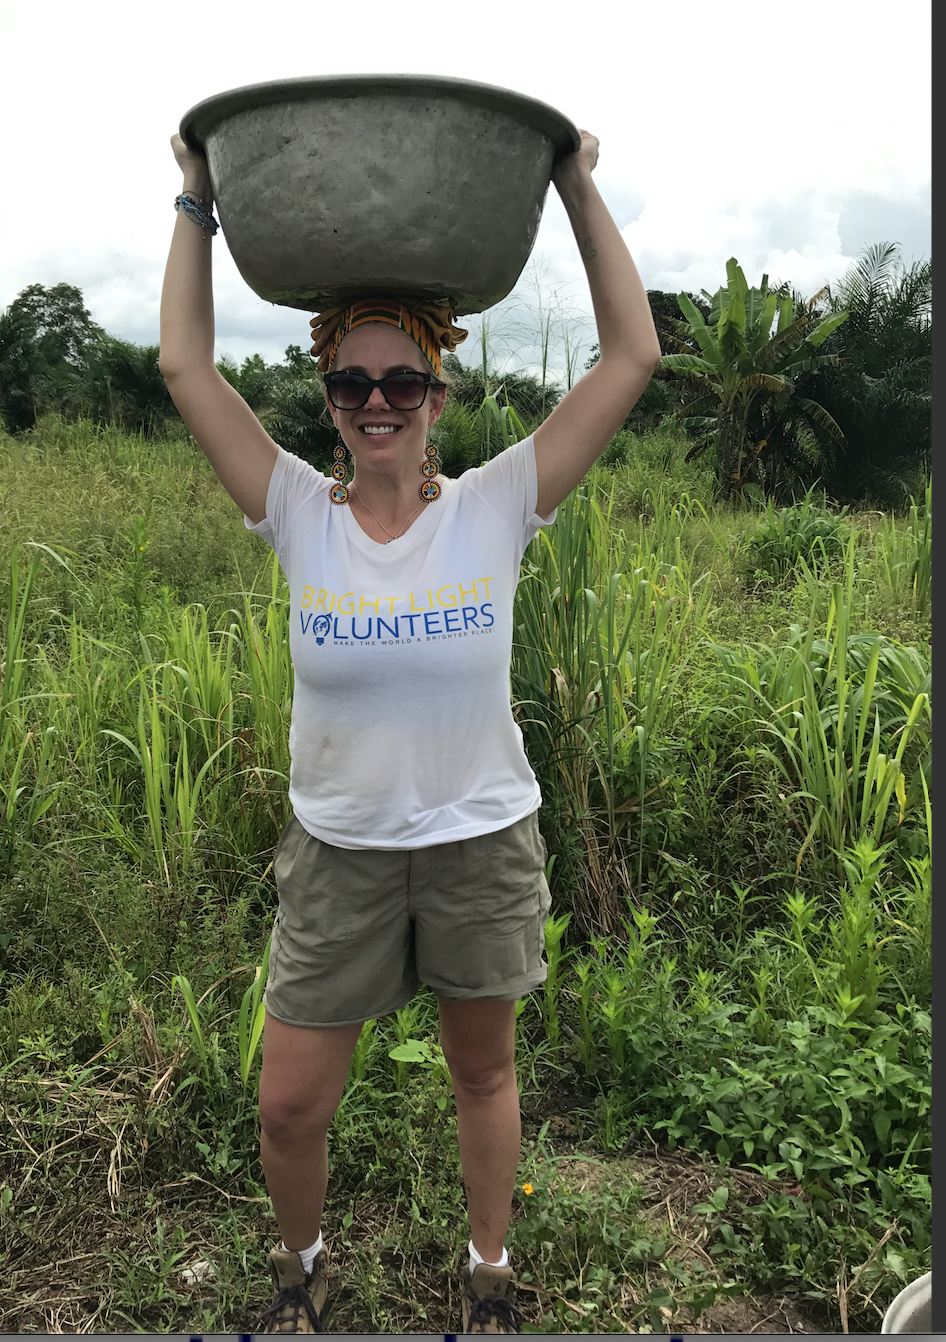 Bright Light Volunteer founder Catherine Greenberg while leading a group of students from CA to build a school in the Volta Region of Ghana. BLV currently operates in ten countries around the world!